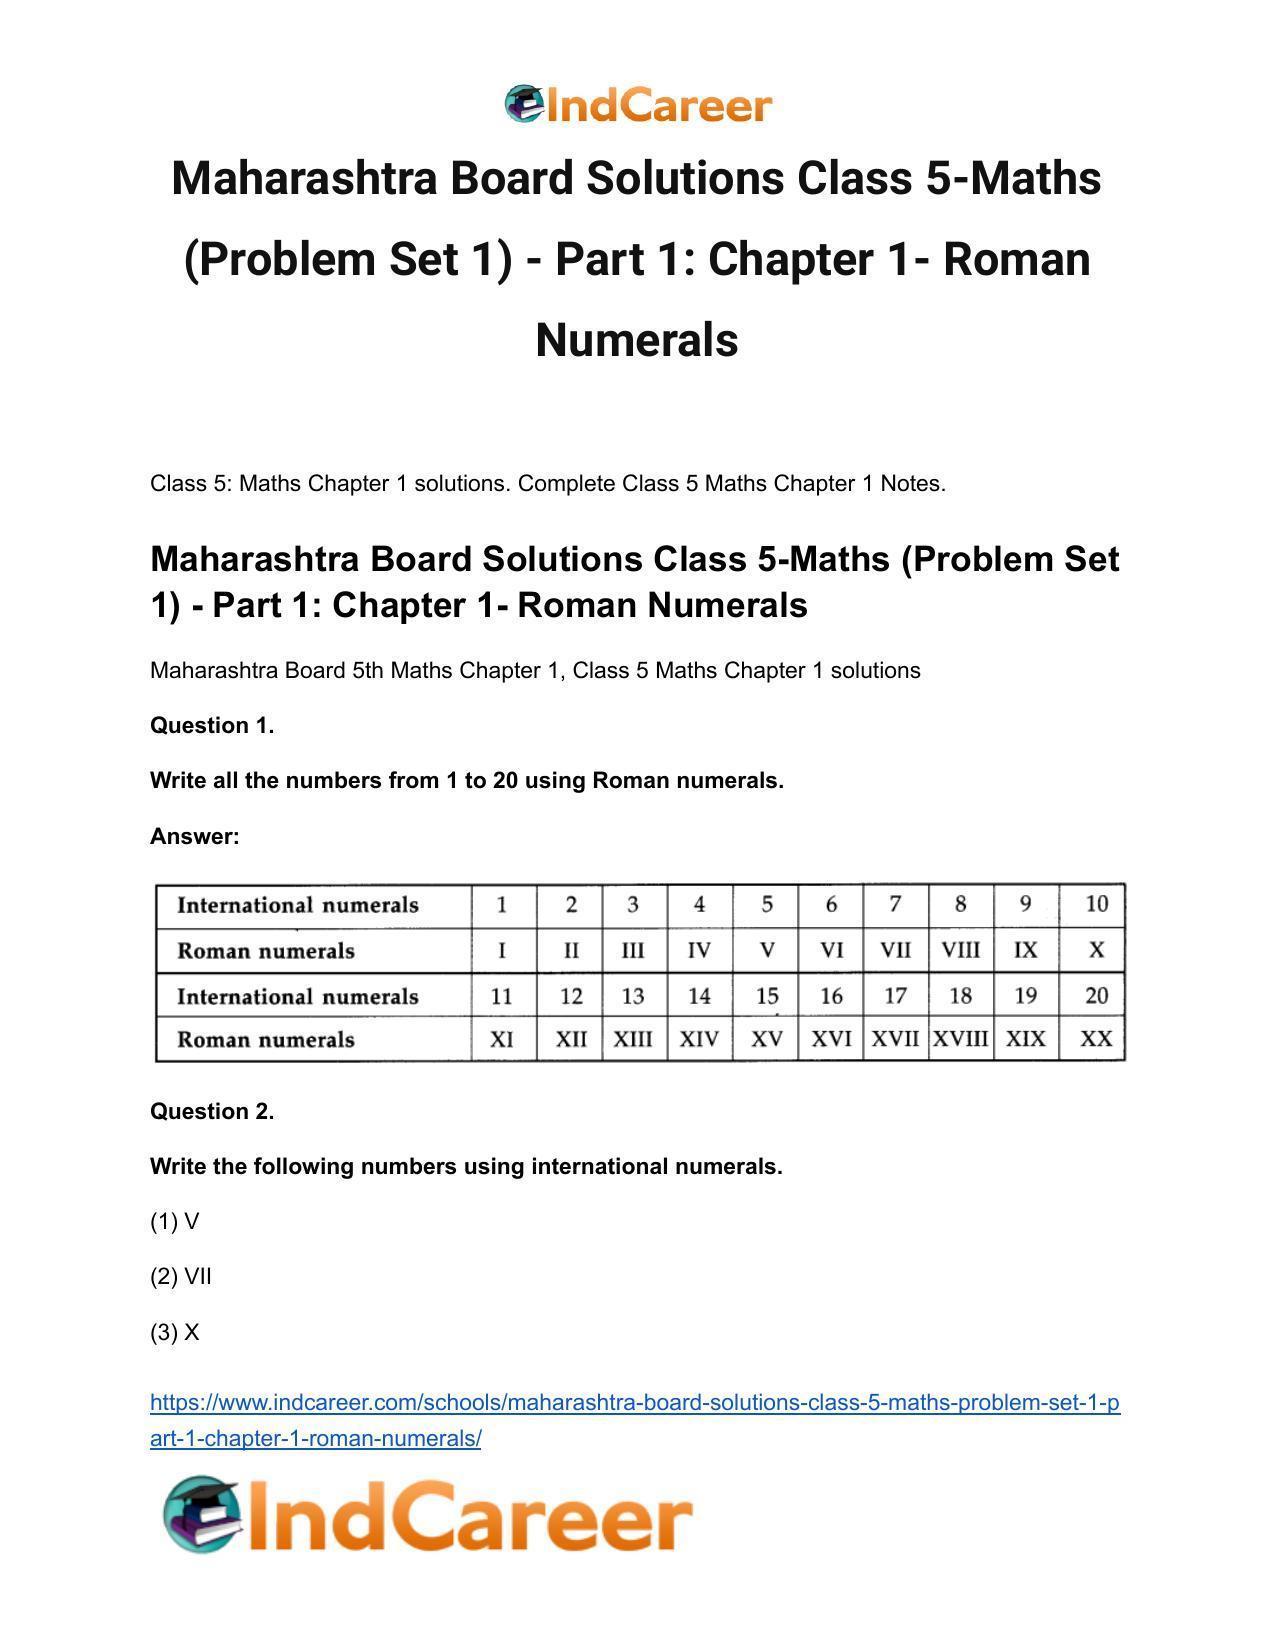 Maharashtra Board Solutions Class 5-Maths (Problem Set 1) - Part 1: Chapter 1- Roman Numerals - Page 2